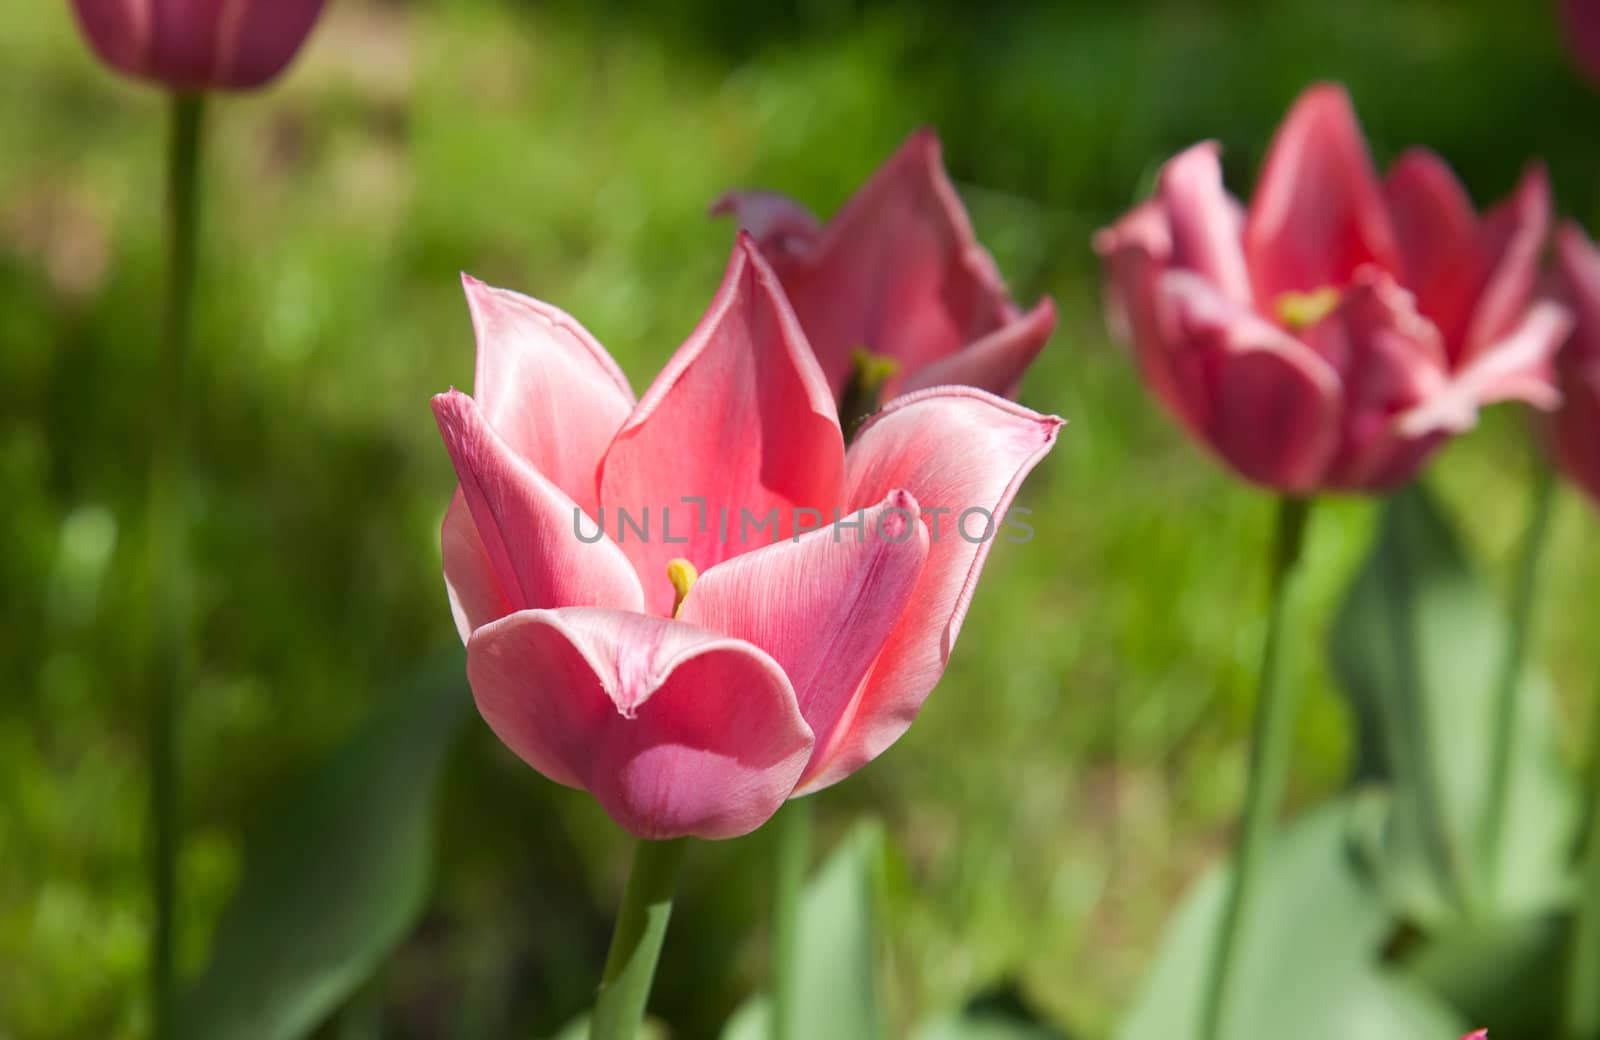 Pink tulip in spring close view